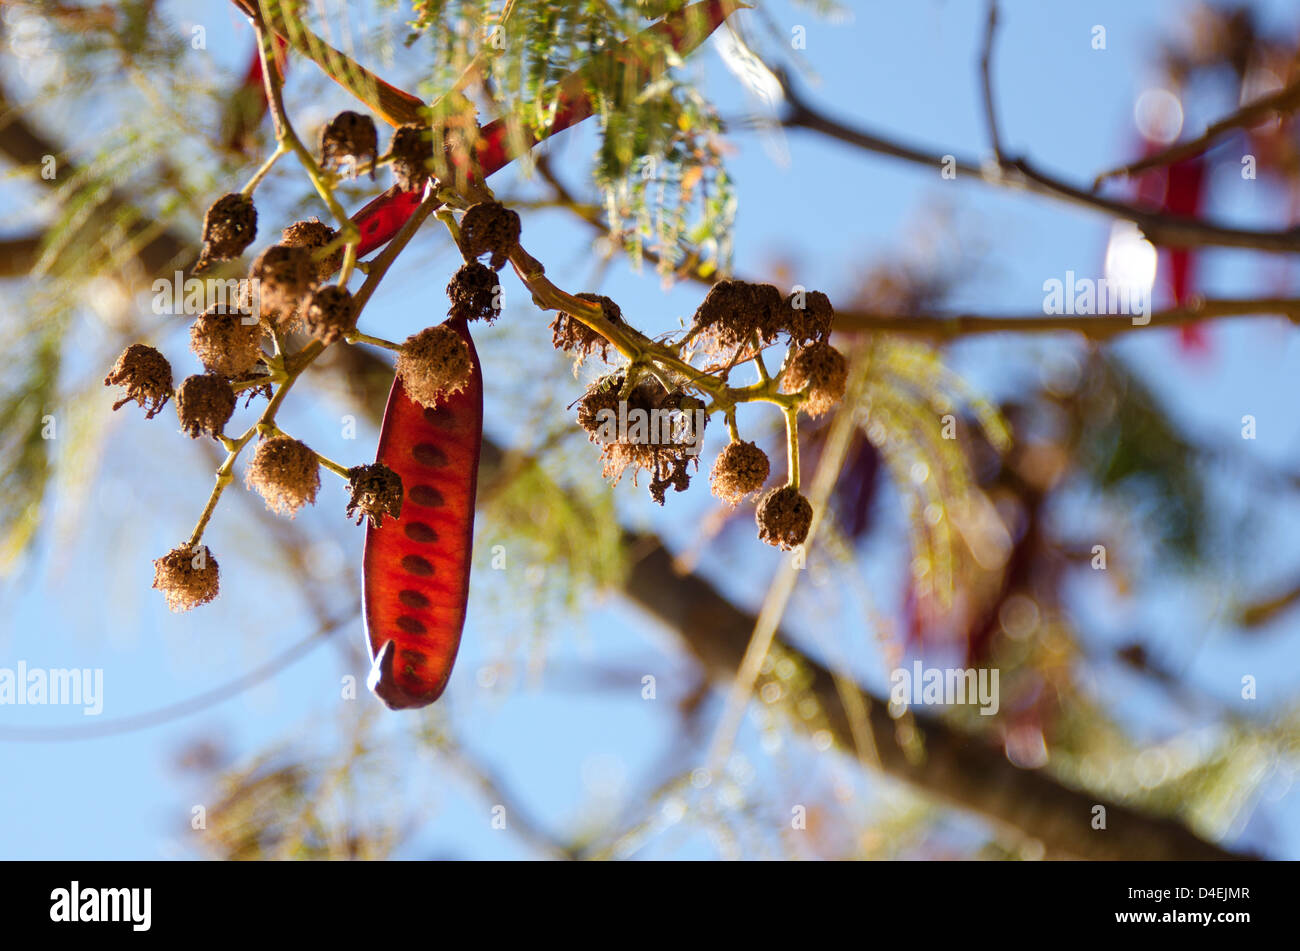 The deep red seedpods and delicate leaves of the guaje, or Huāxcuahuitl, tree. Oaxaca, Mexico. Stock Photo